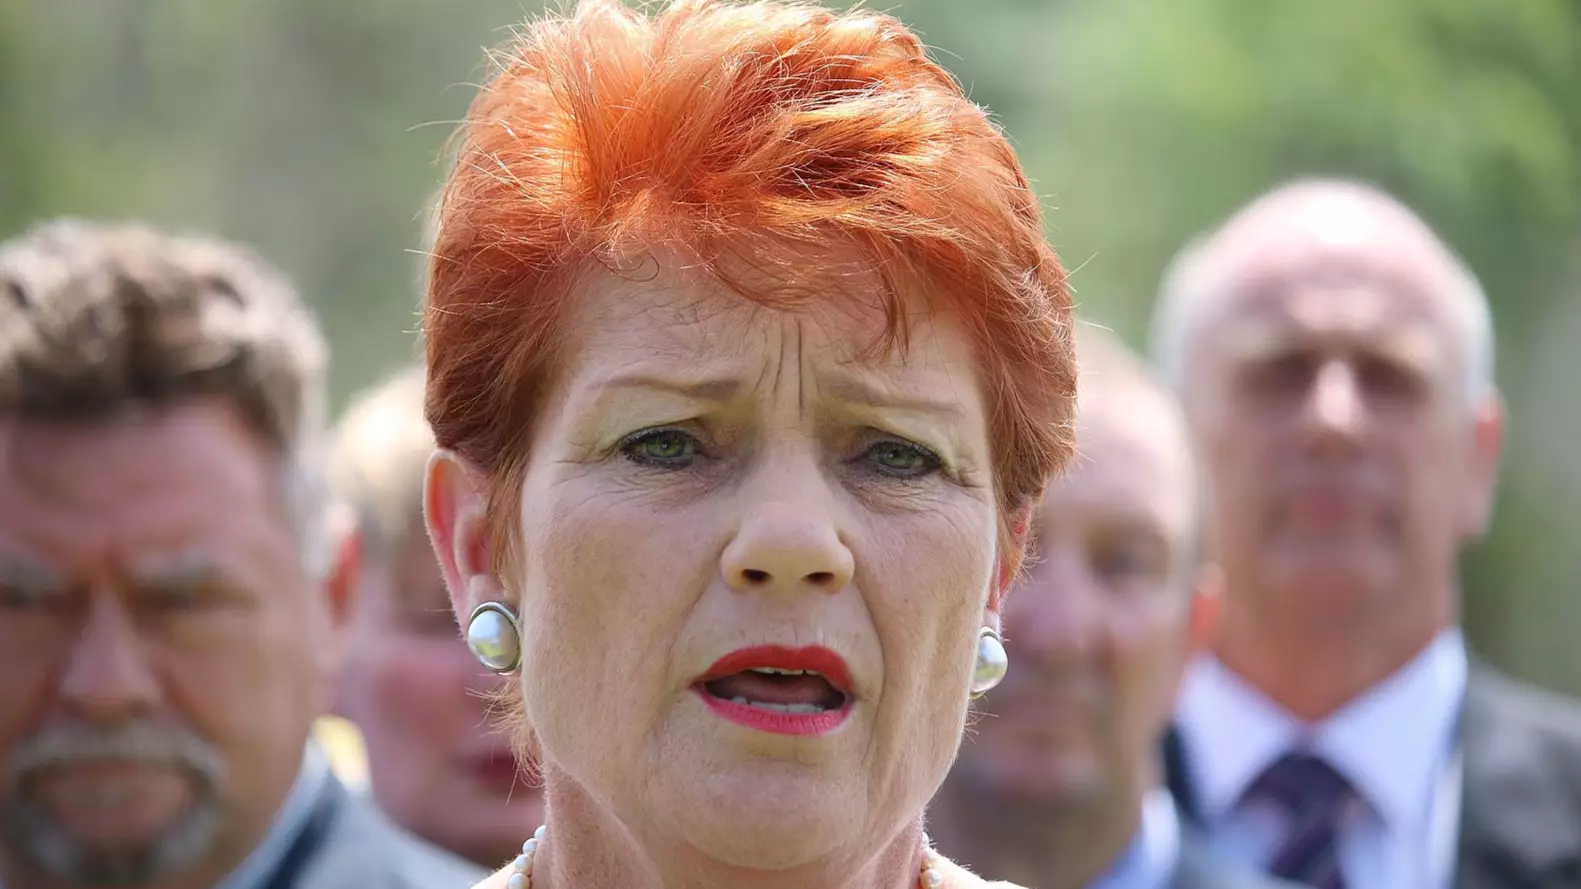 Pranksters Redirected Pauline Hanson's Unguarded Website To The Refugee Council’s Page